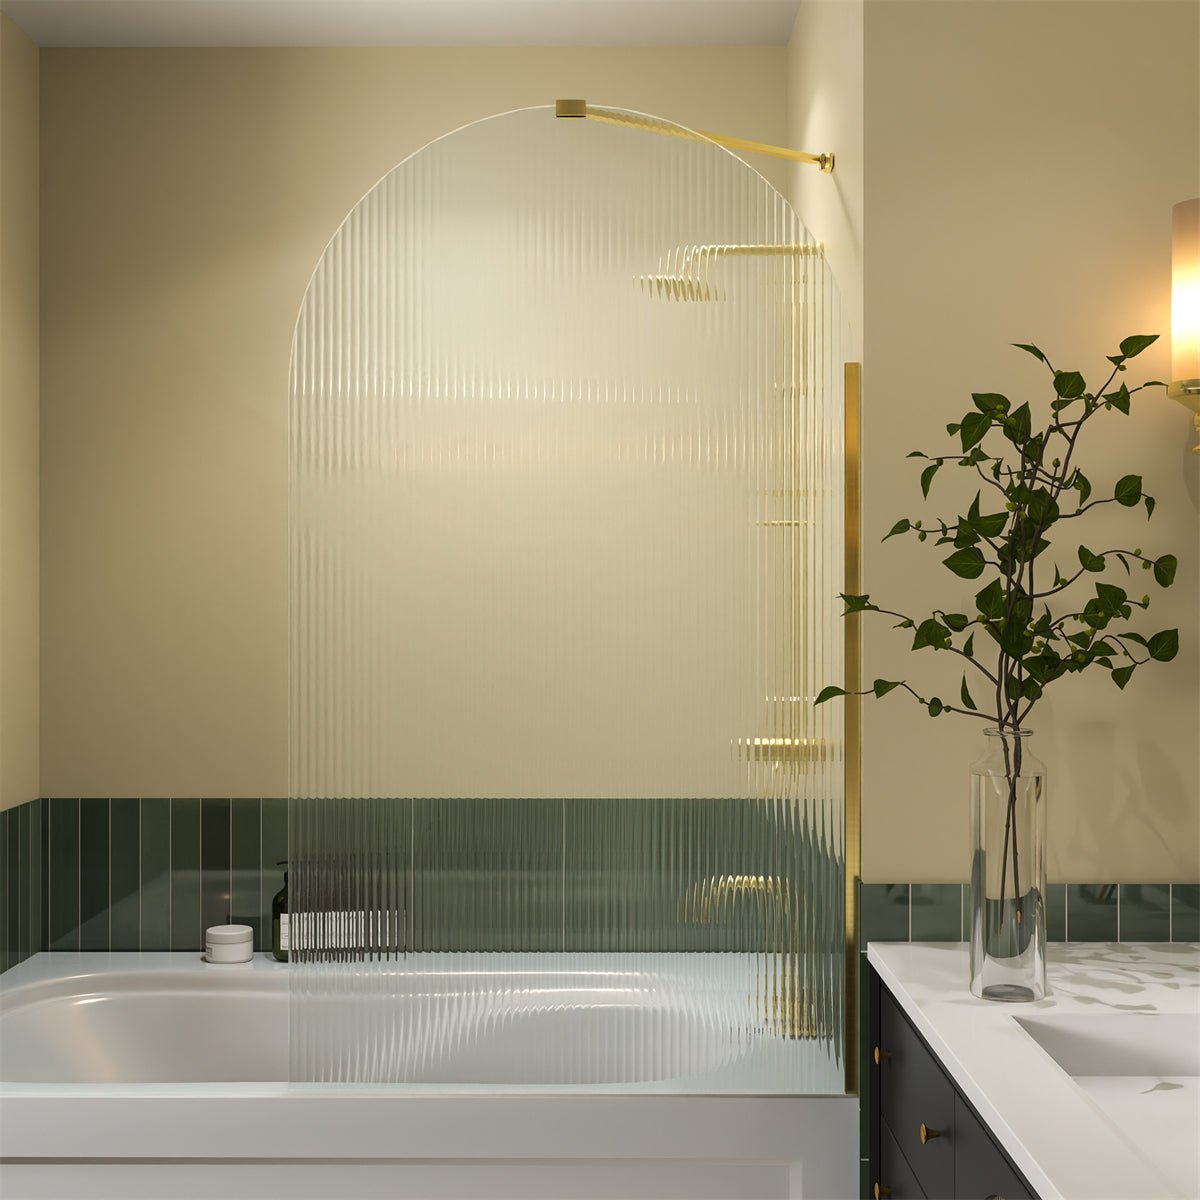 Serenity 33" x 58" Bathtub Screen Reeded Glass Shower Panel For Bathtub,Brushed Gold Finish,Reversible Installation,Semicircle